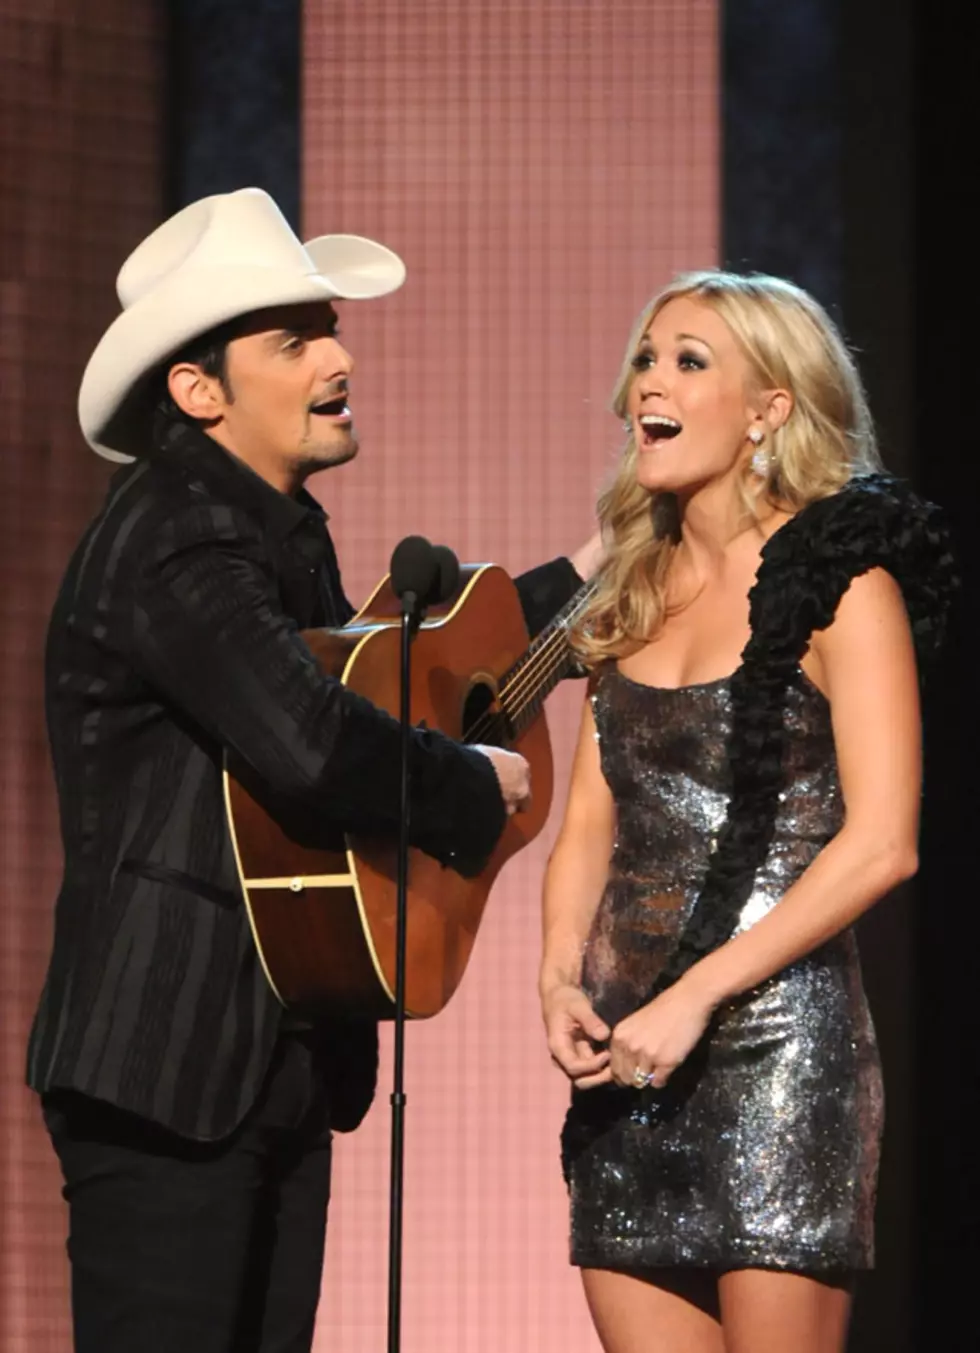 Brad Paisley And Carrie Underwood Release Video For &#8220;Remind Me&#8221; [VIDEO]